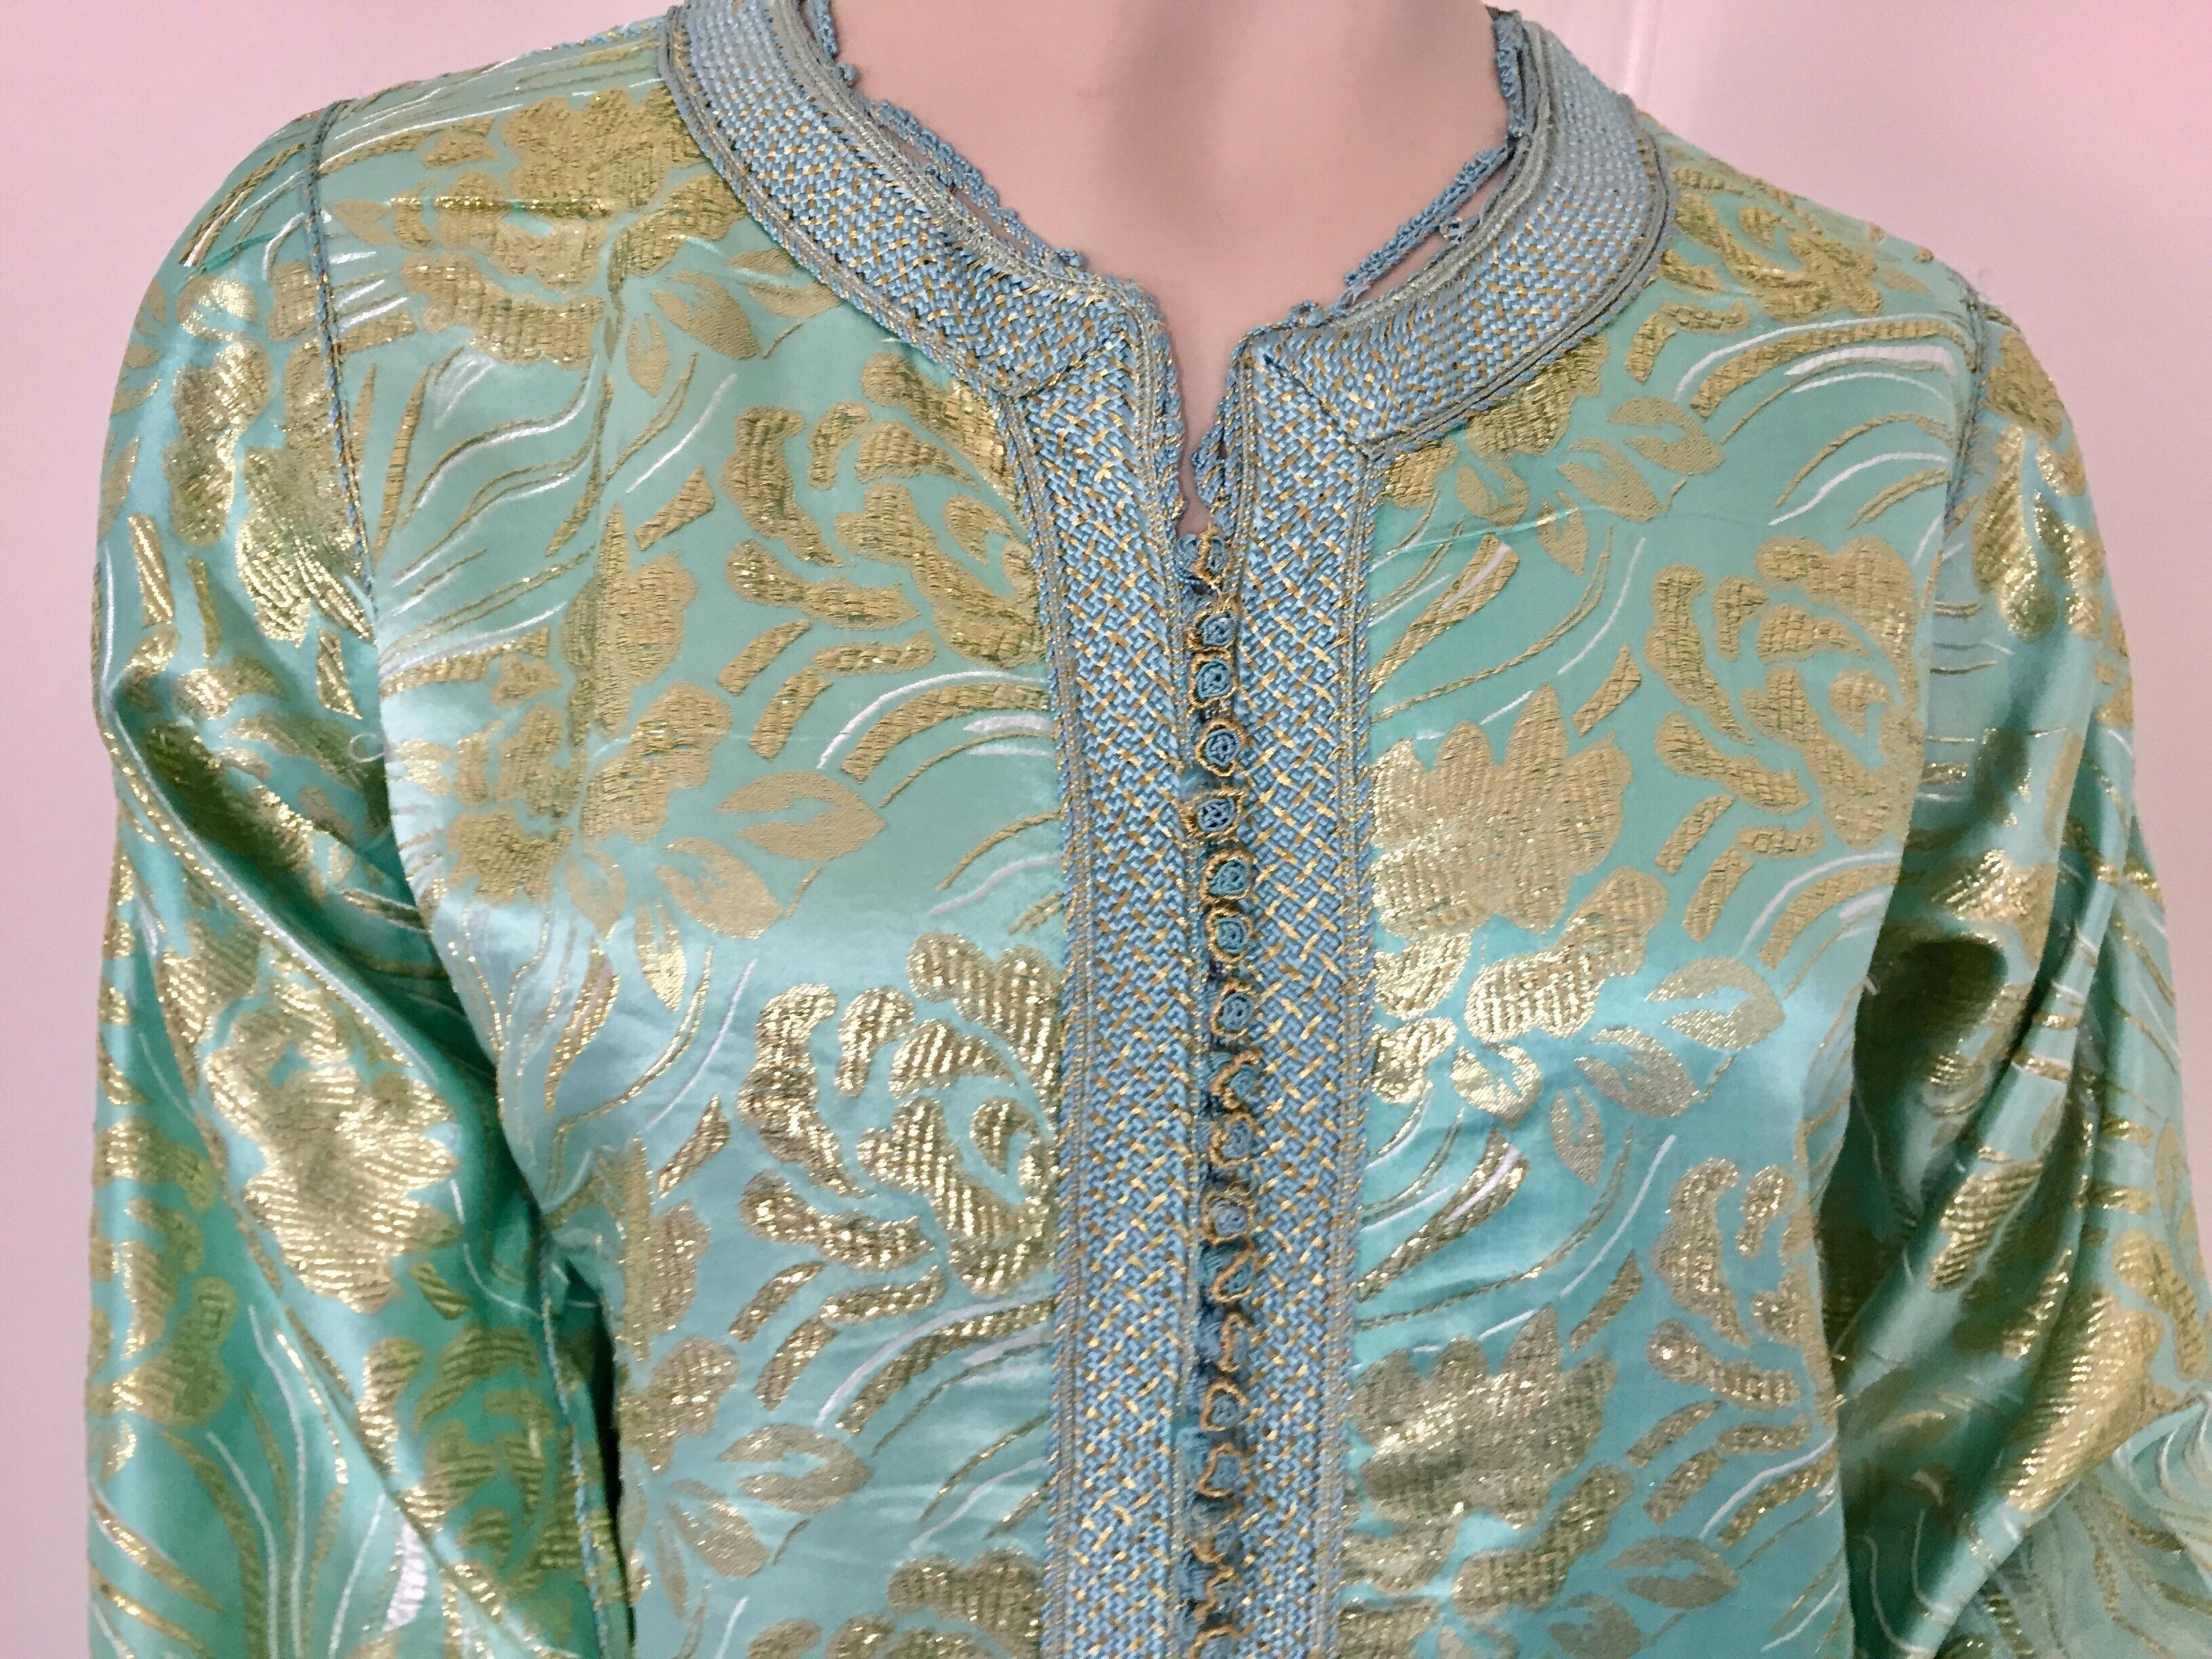 Women's Moroccan Kaftan in Turquoise and Gold Floral Brocade Metallic Lame For Sale